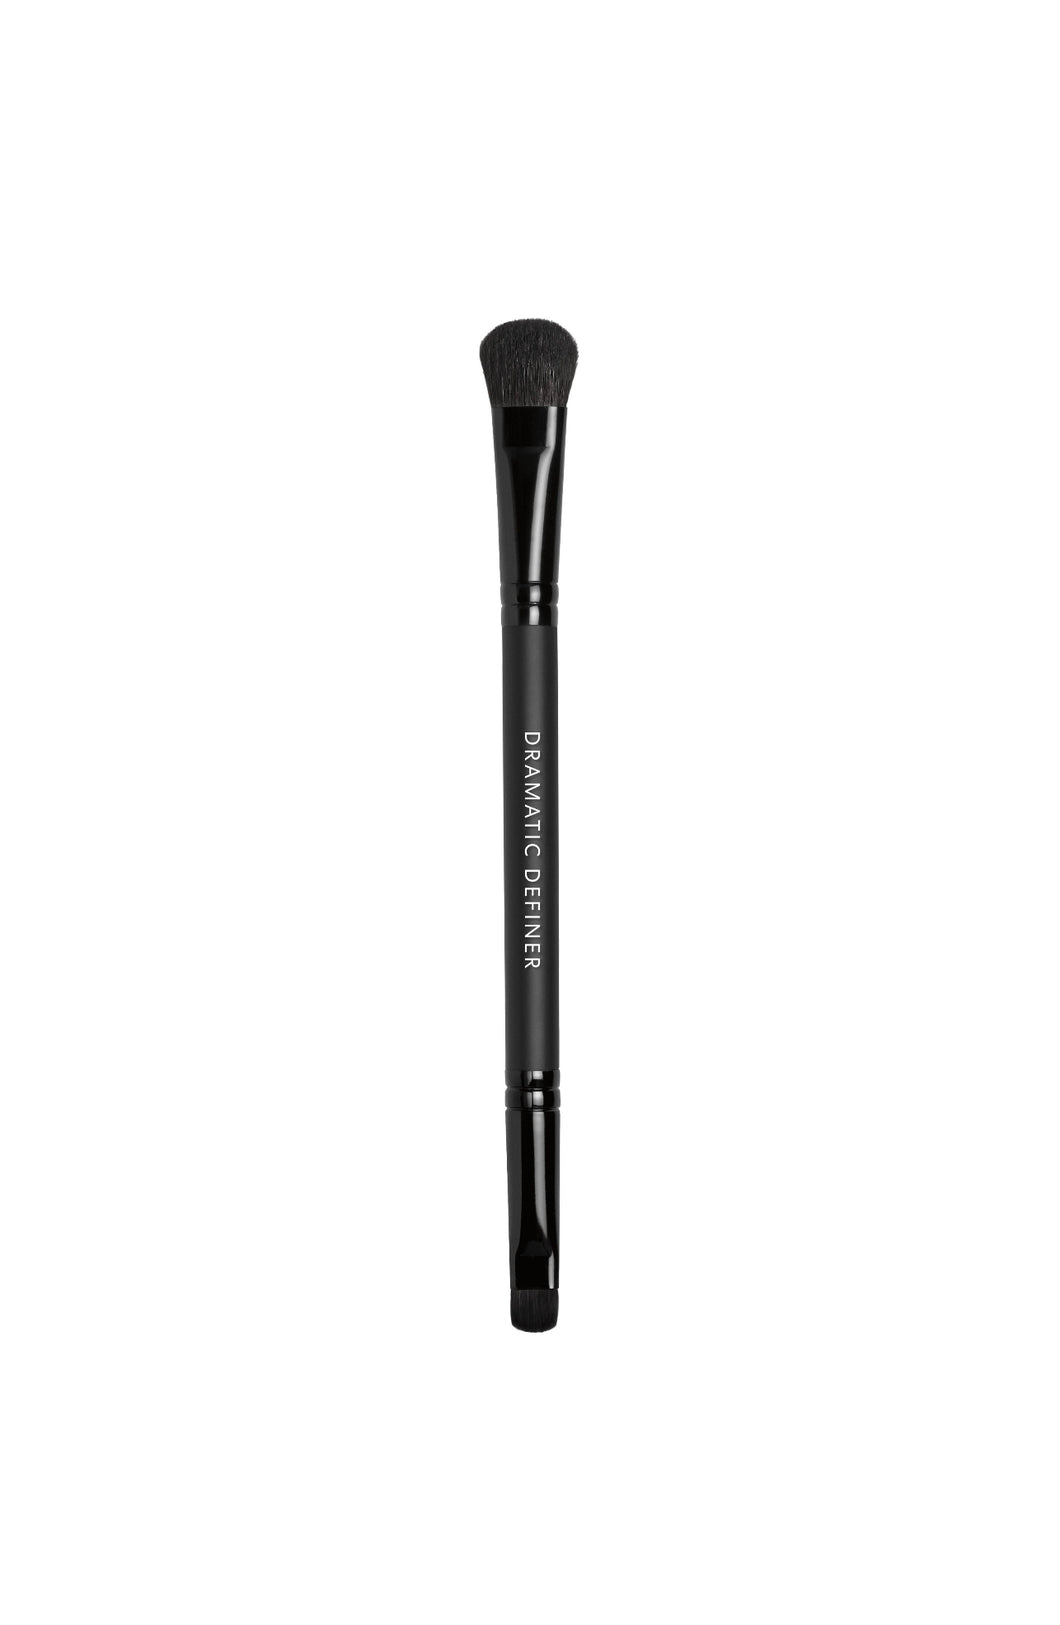 Bare Minerals: Dramatic Definer Dual-Ended Eye Brush